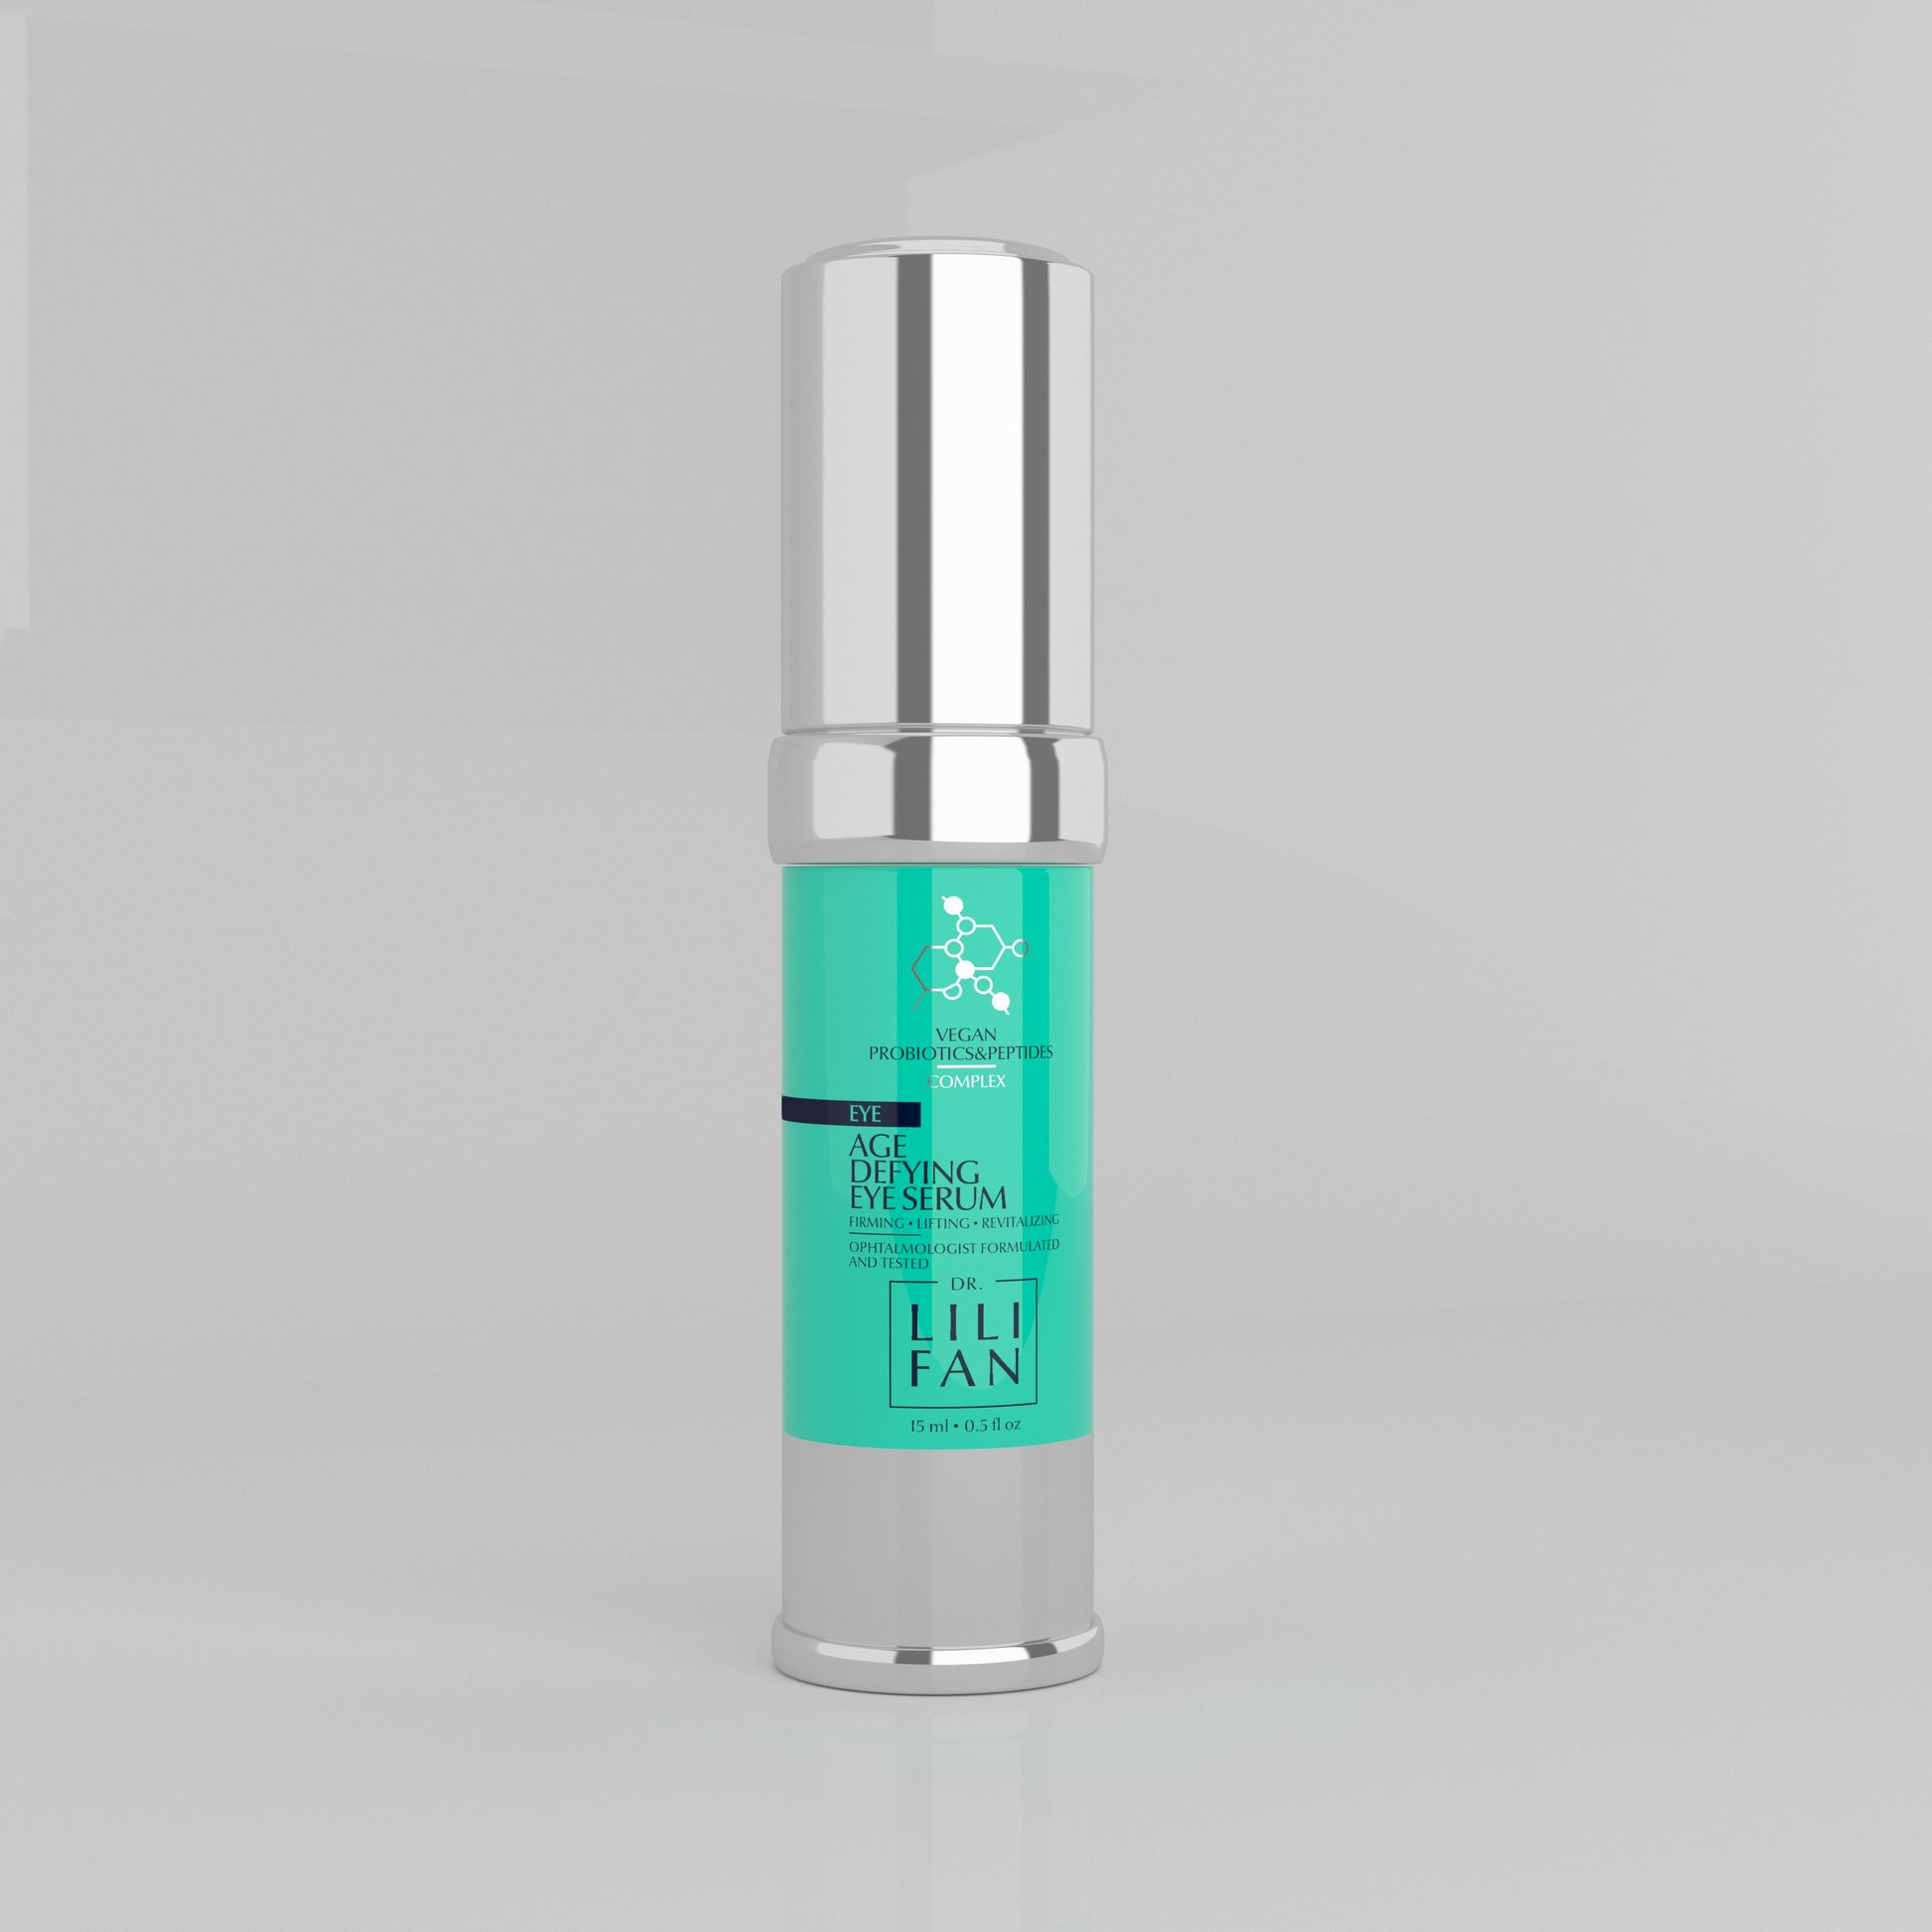 A bottle of Eye Serum on a tan background